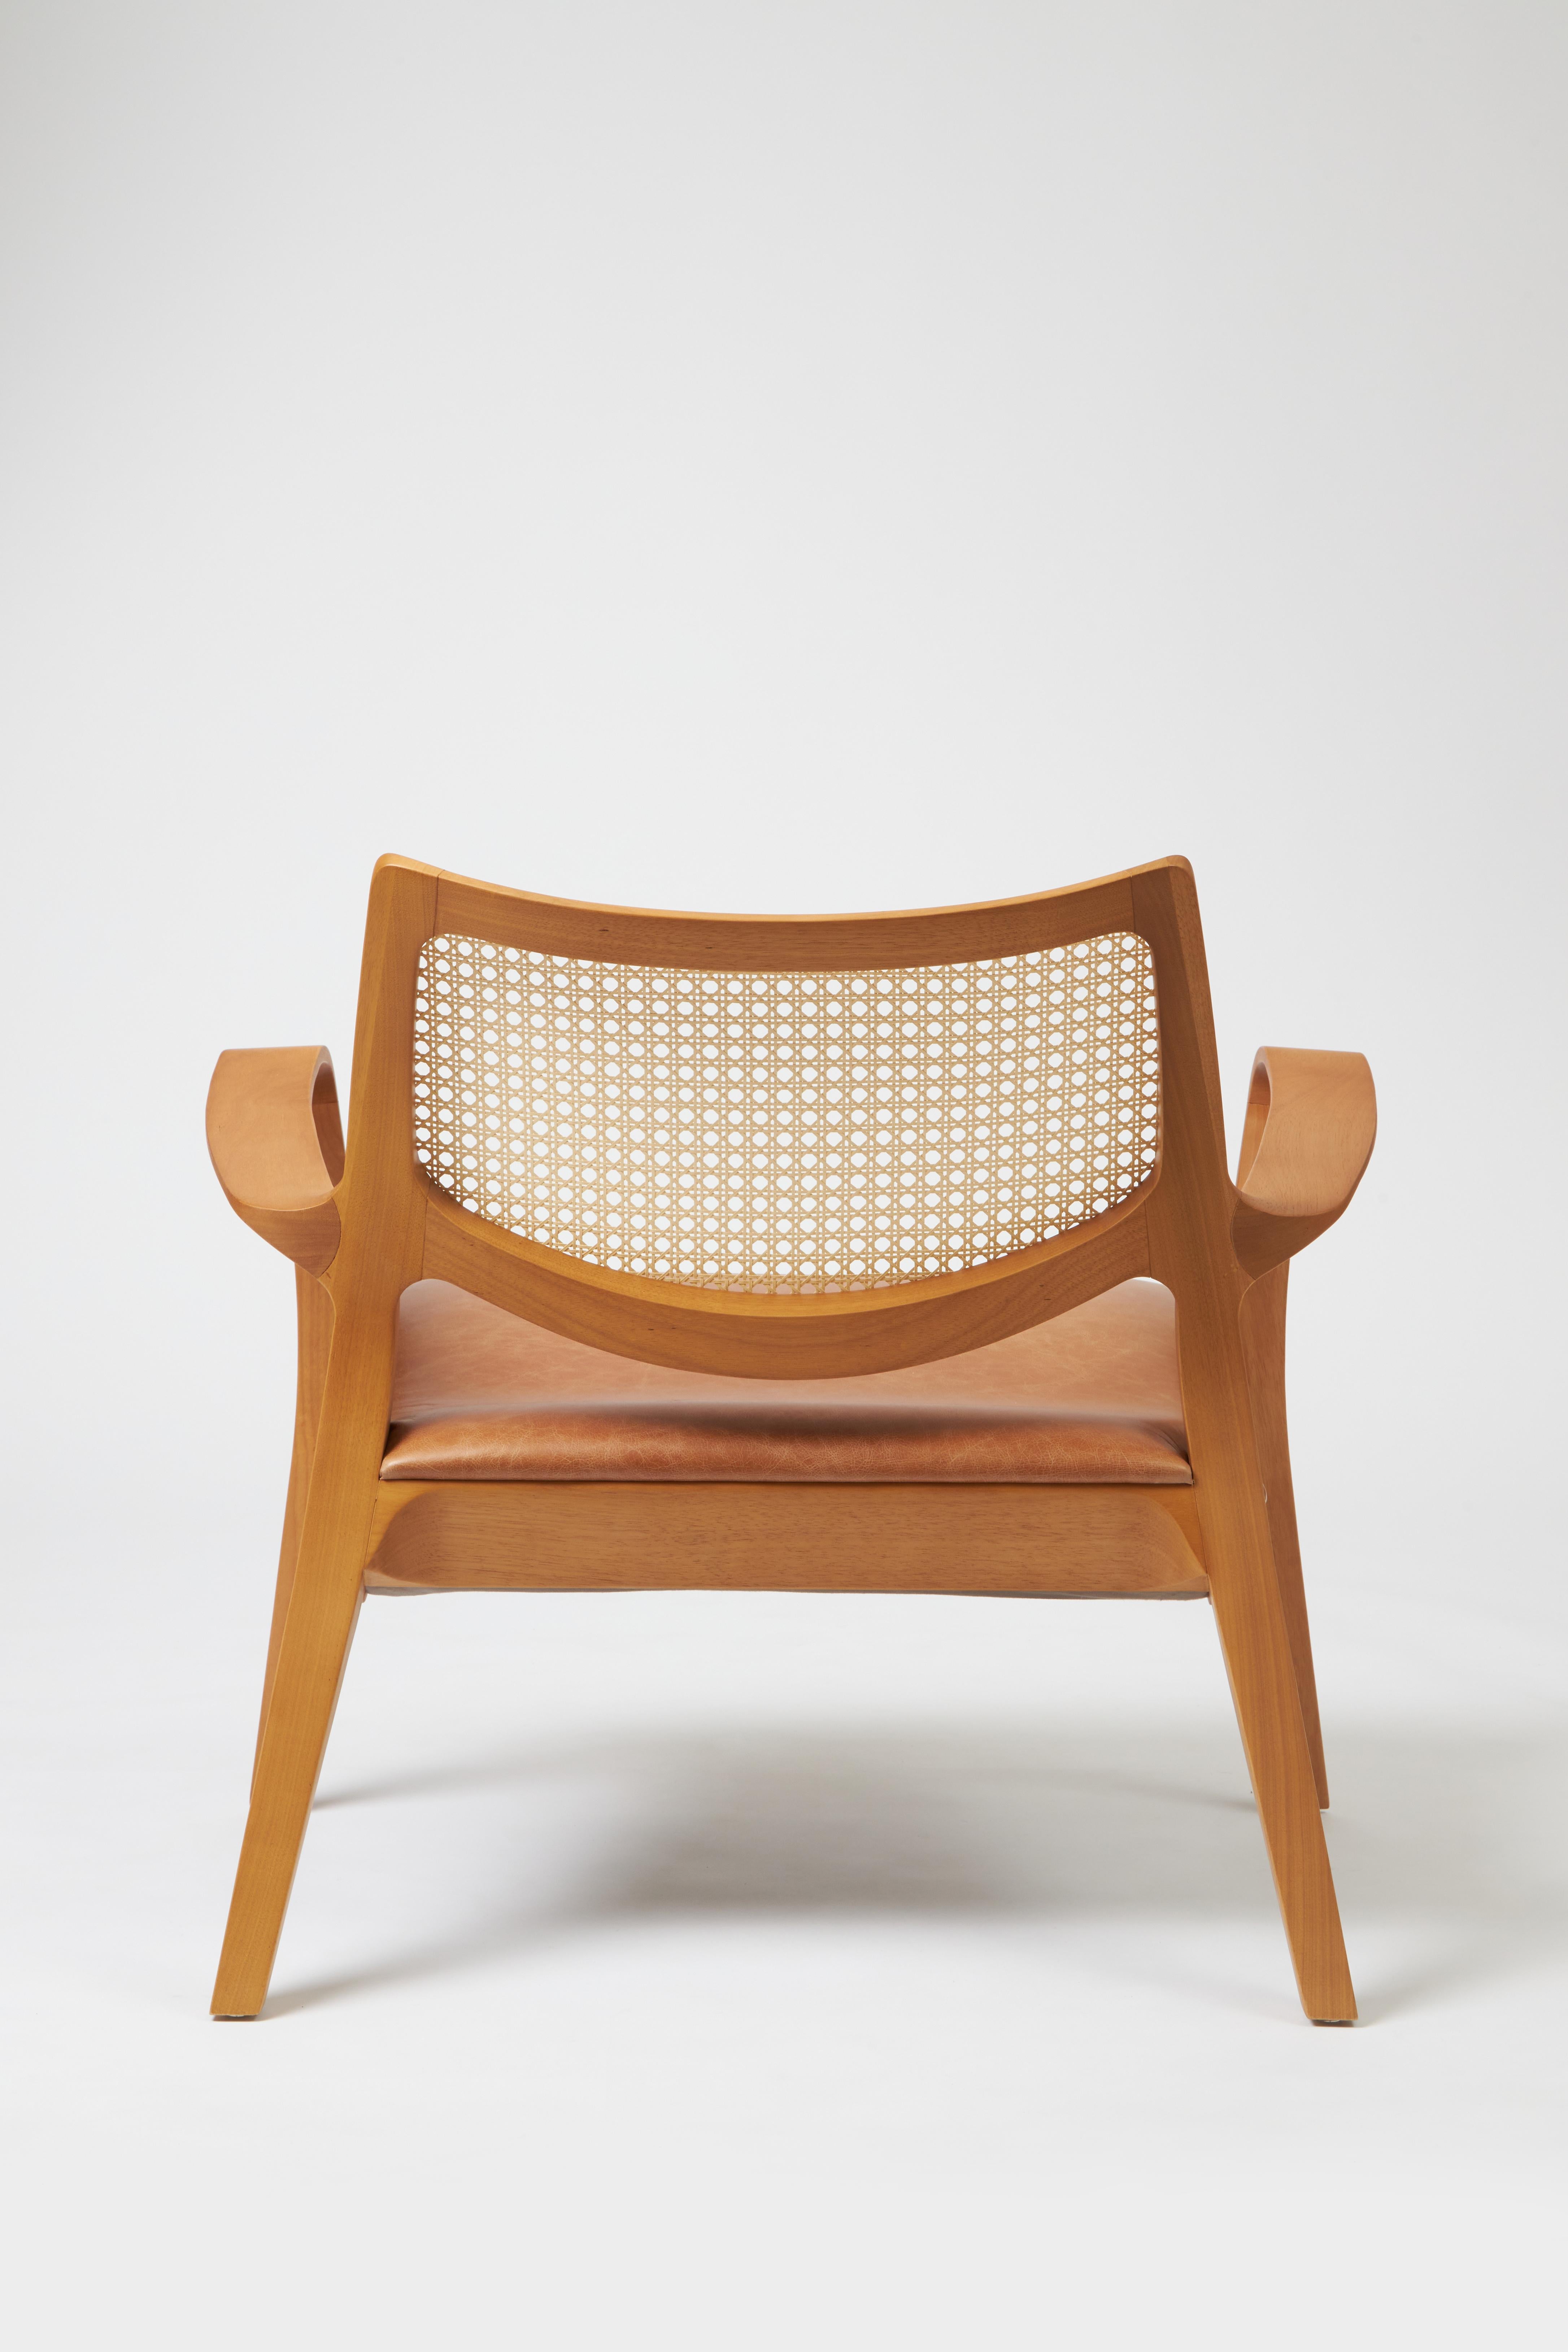 Caning Modern Style Aurora armchair Sculpted in solid wood, caning back, leather seat For Sale